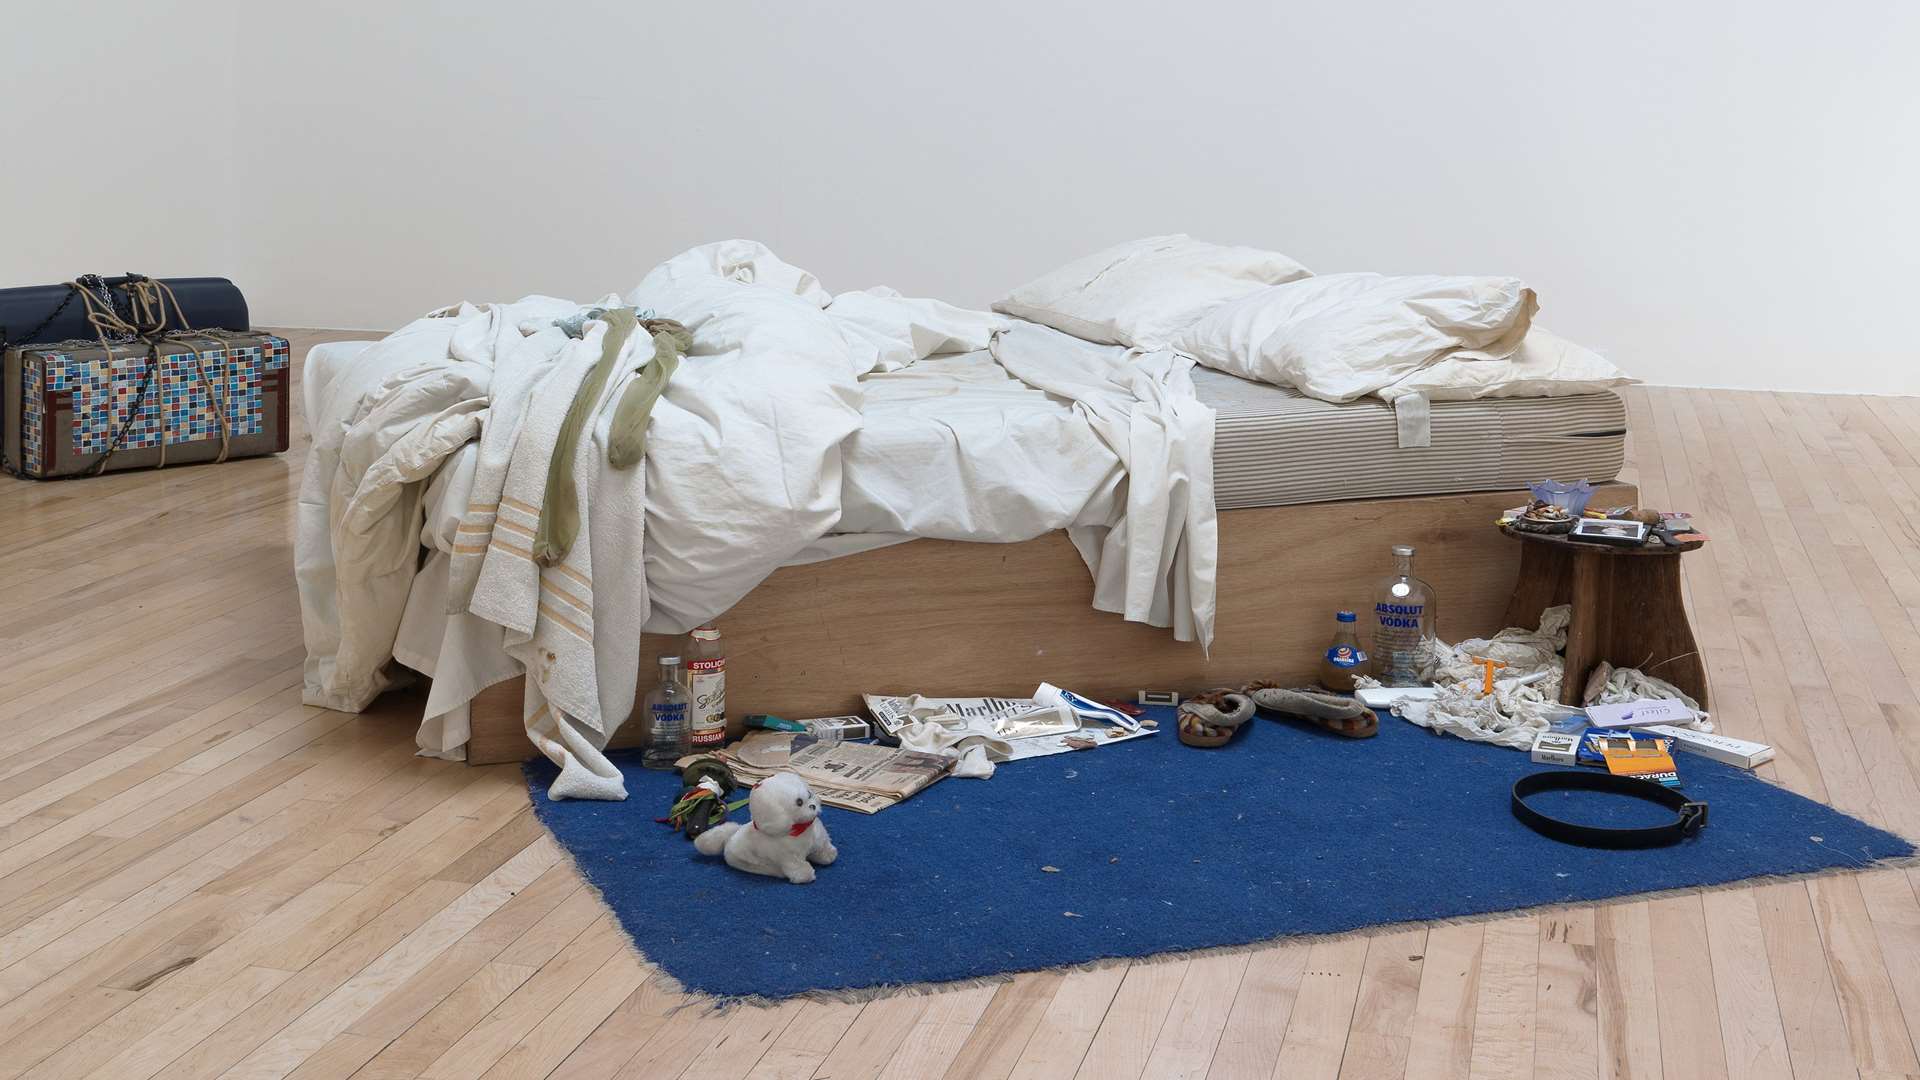 Tracey Emin's installation My Bed. © Tate, London 2017